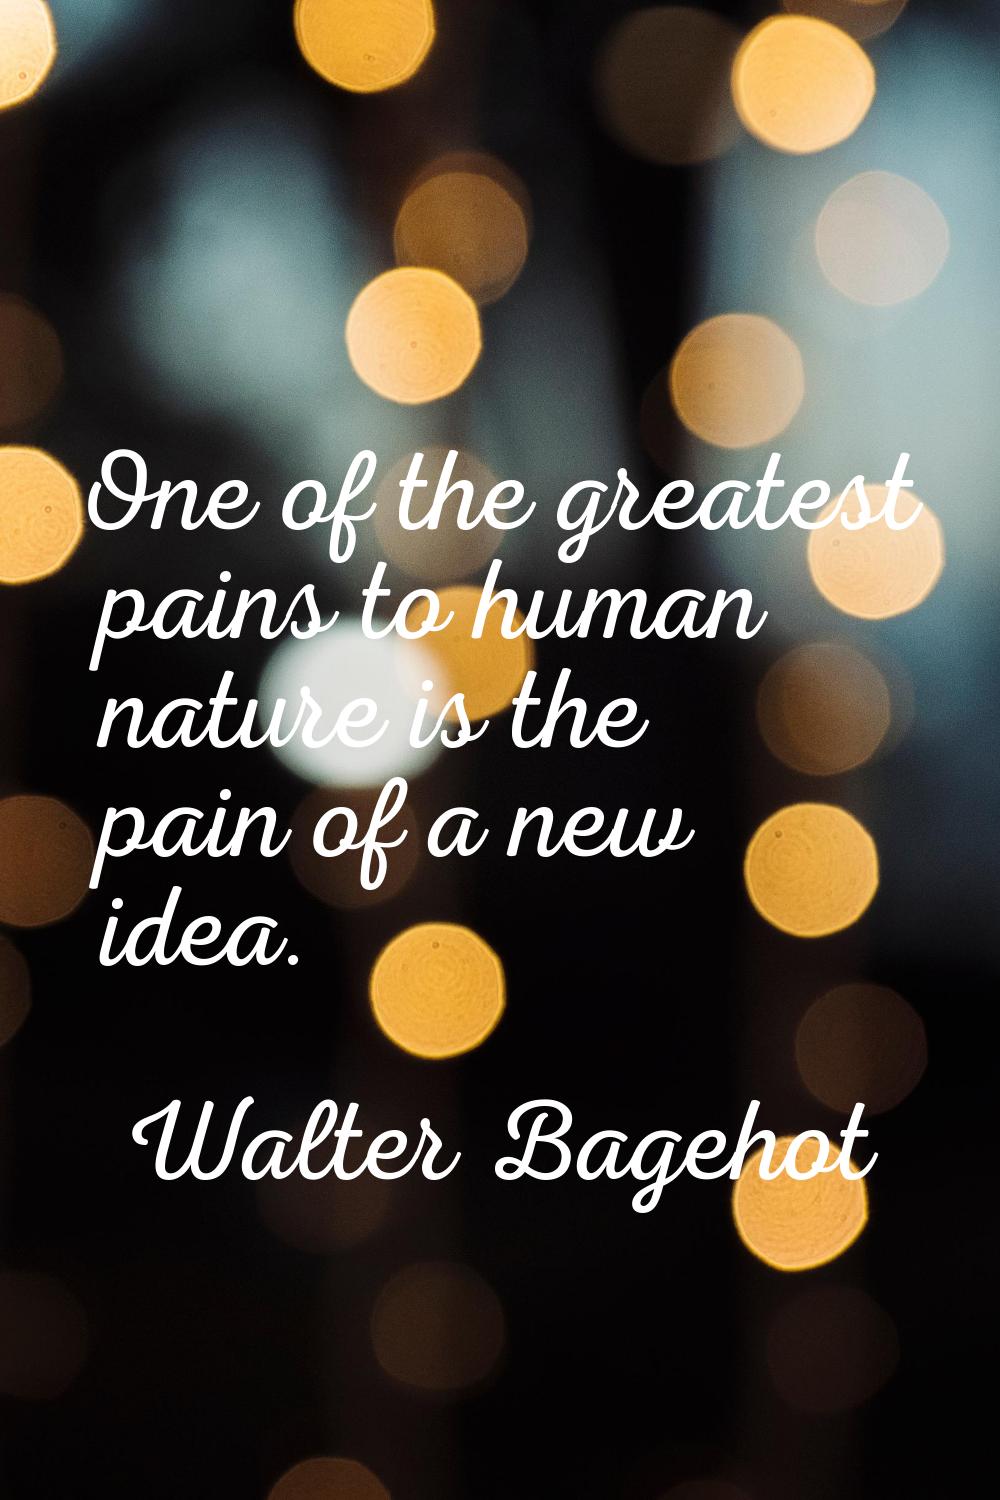 One of the greatest pains to human nature is the pain of a new idea.